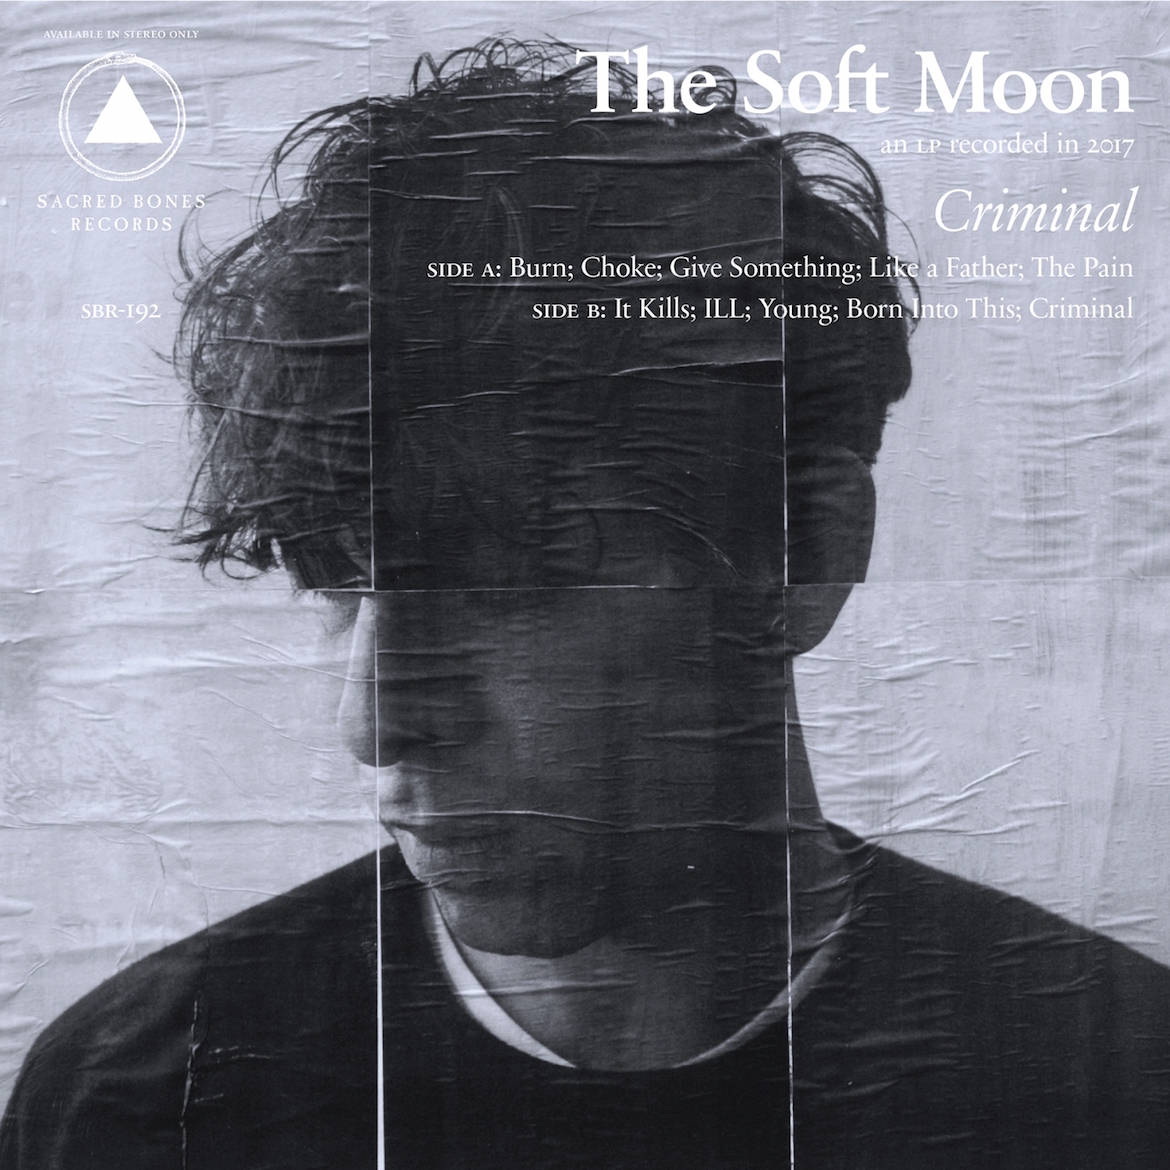 Criminal Album Cover by Soft Moon